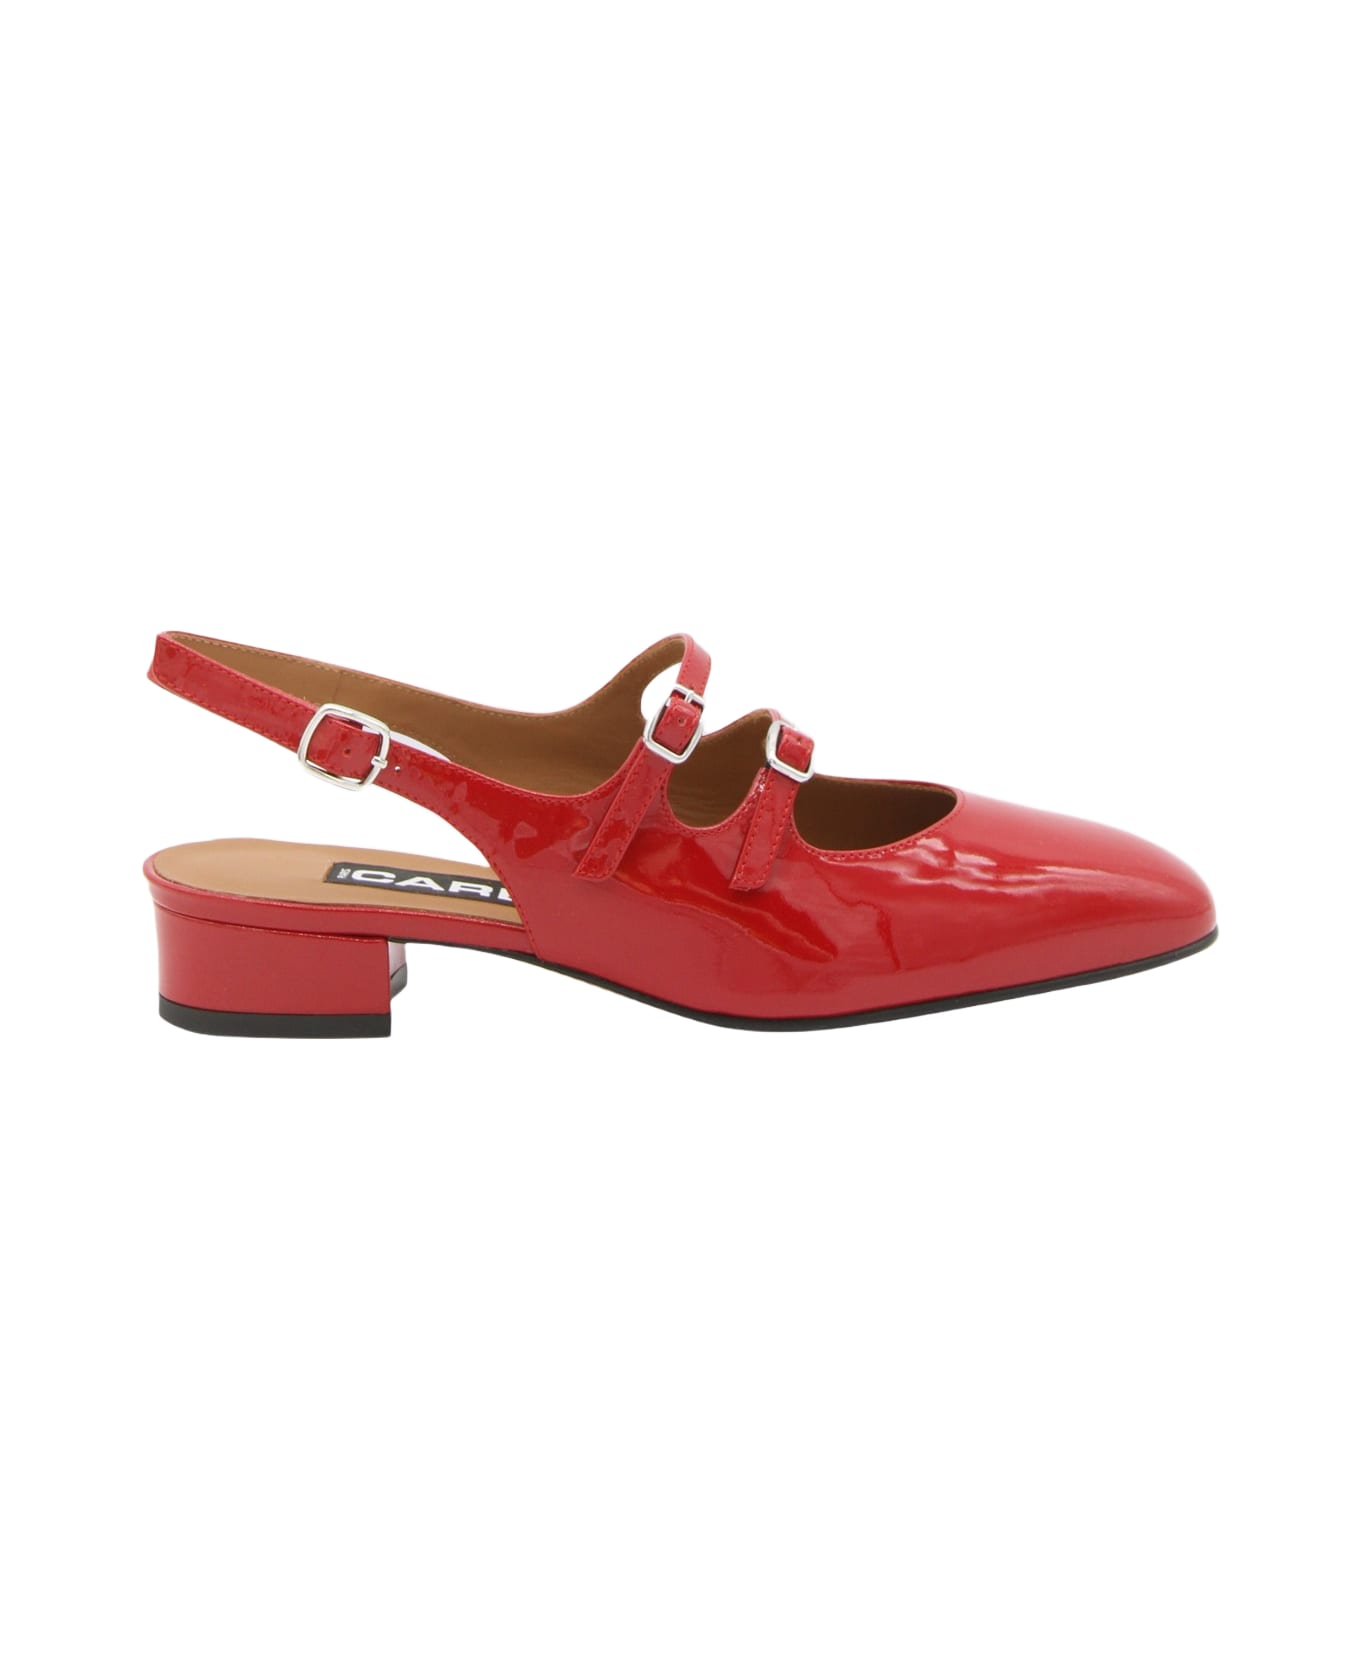 Carel Red Leather Slingback Mary Janes Pumps